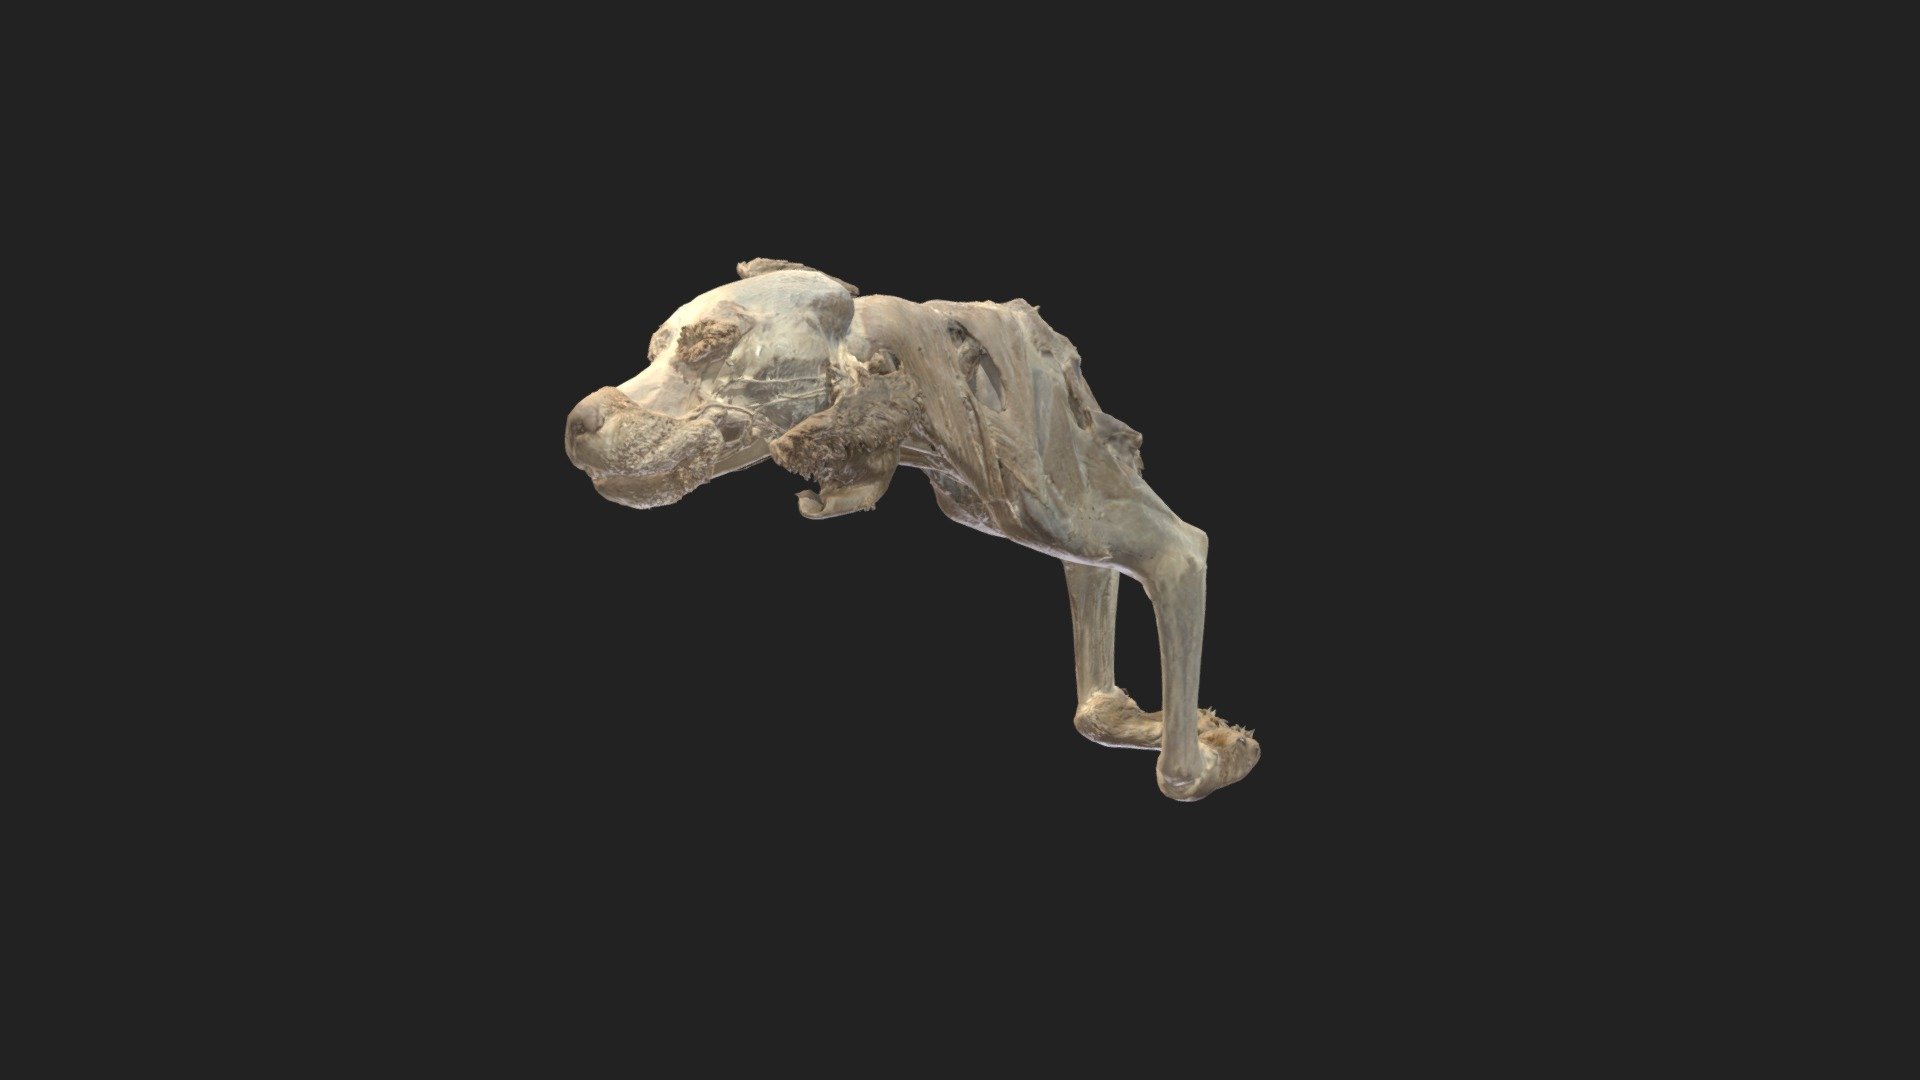 superficial muscle layer of the torso and the forelimbs of a dog 

size of specimen: 665.2 x 417.3 x 152.3 mm

3D scanning performed with the structured light scanners “Artec Leo” and “Artec Space Spider” - torso and forelimbs dog - 3D model by vetanatMunich 3d model